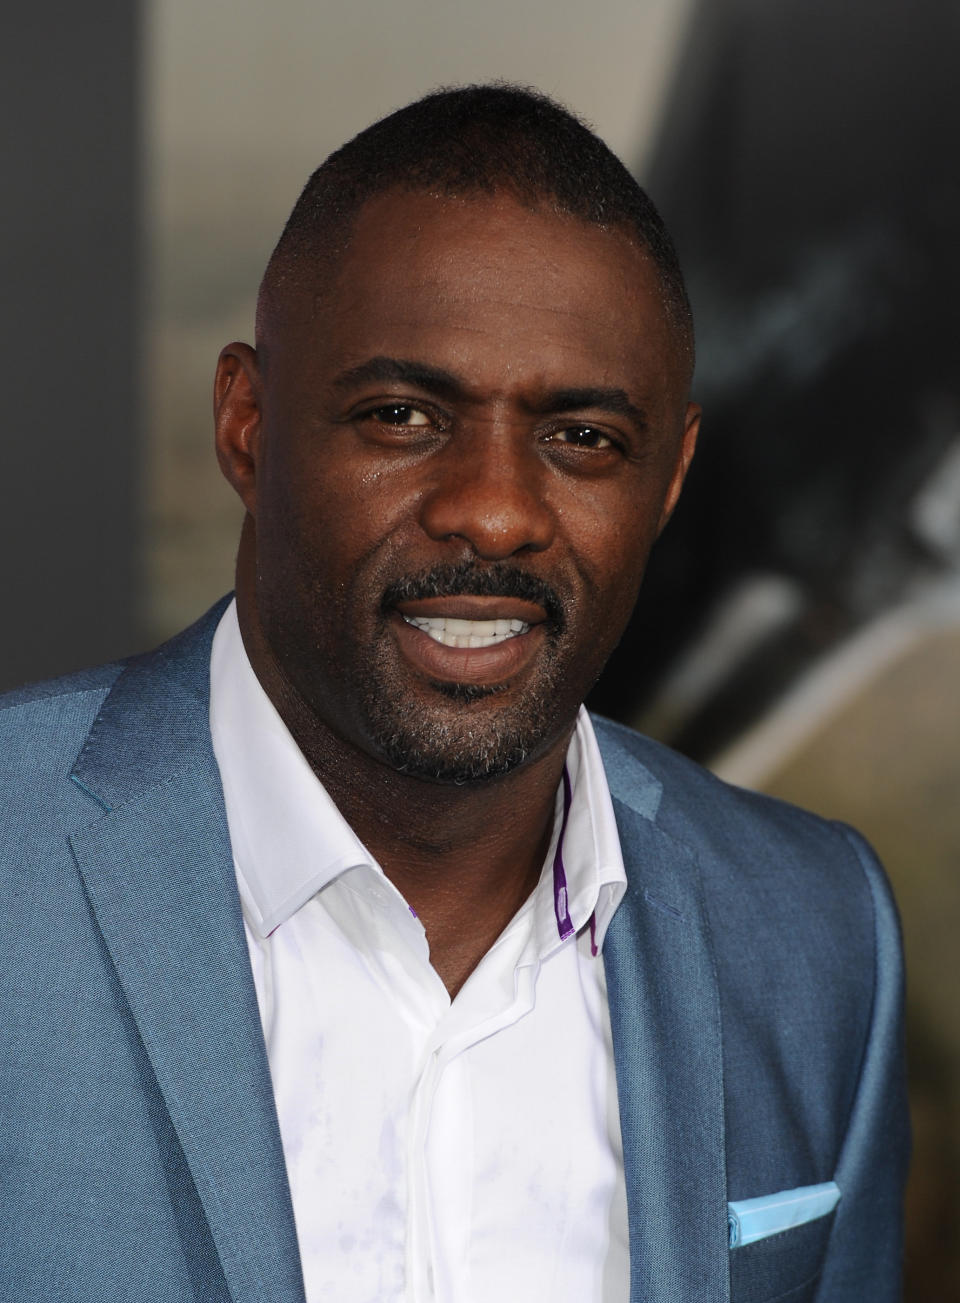 LONDON, UNITED KINGDOM - JULY 04: Idris Elba attends the European Premiere of 'Pacific Rim' at BFI IMAX on July 4, 2013 in London, England. (Photo by Eamonn M. McCormack/Getty Images)